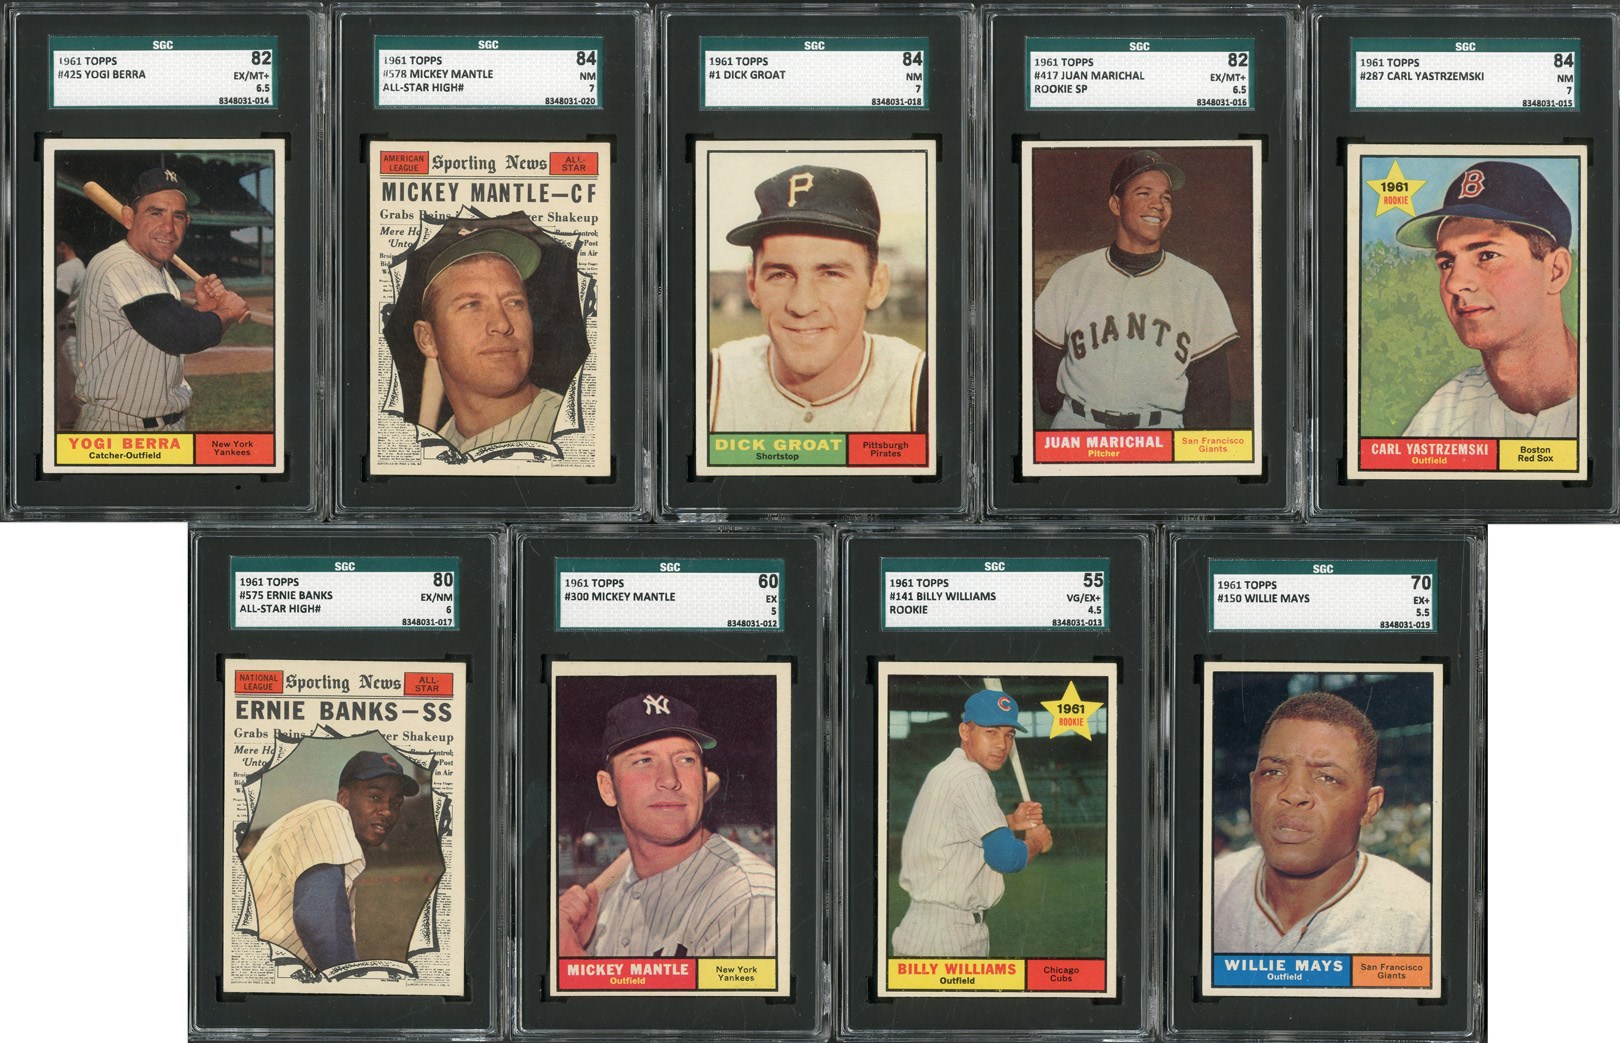 1961 Topps HIGH GRADE Complete Set (587 Cards - 9 SGC Graded)